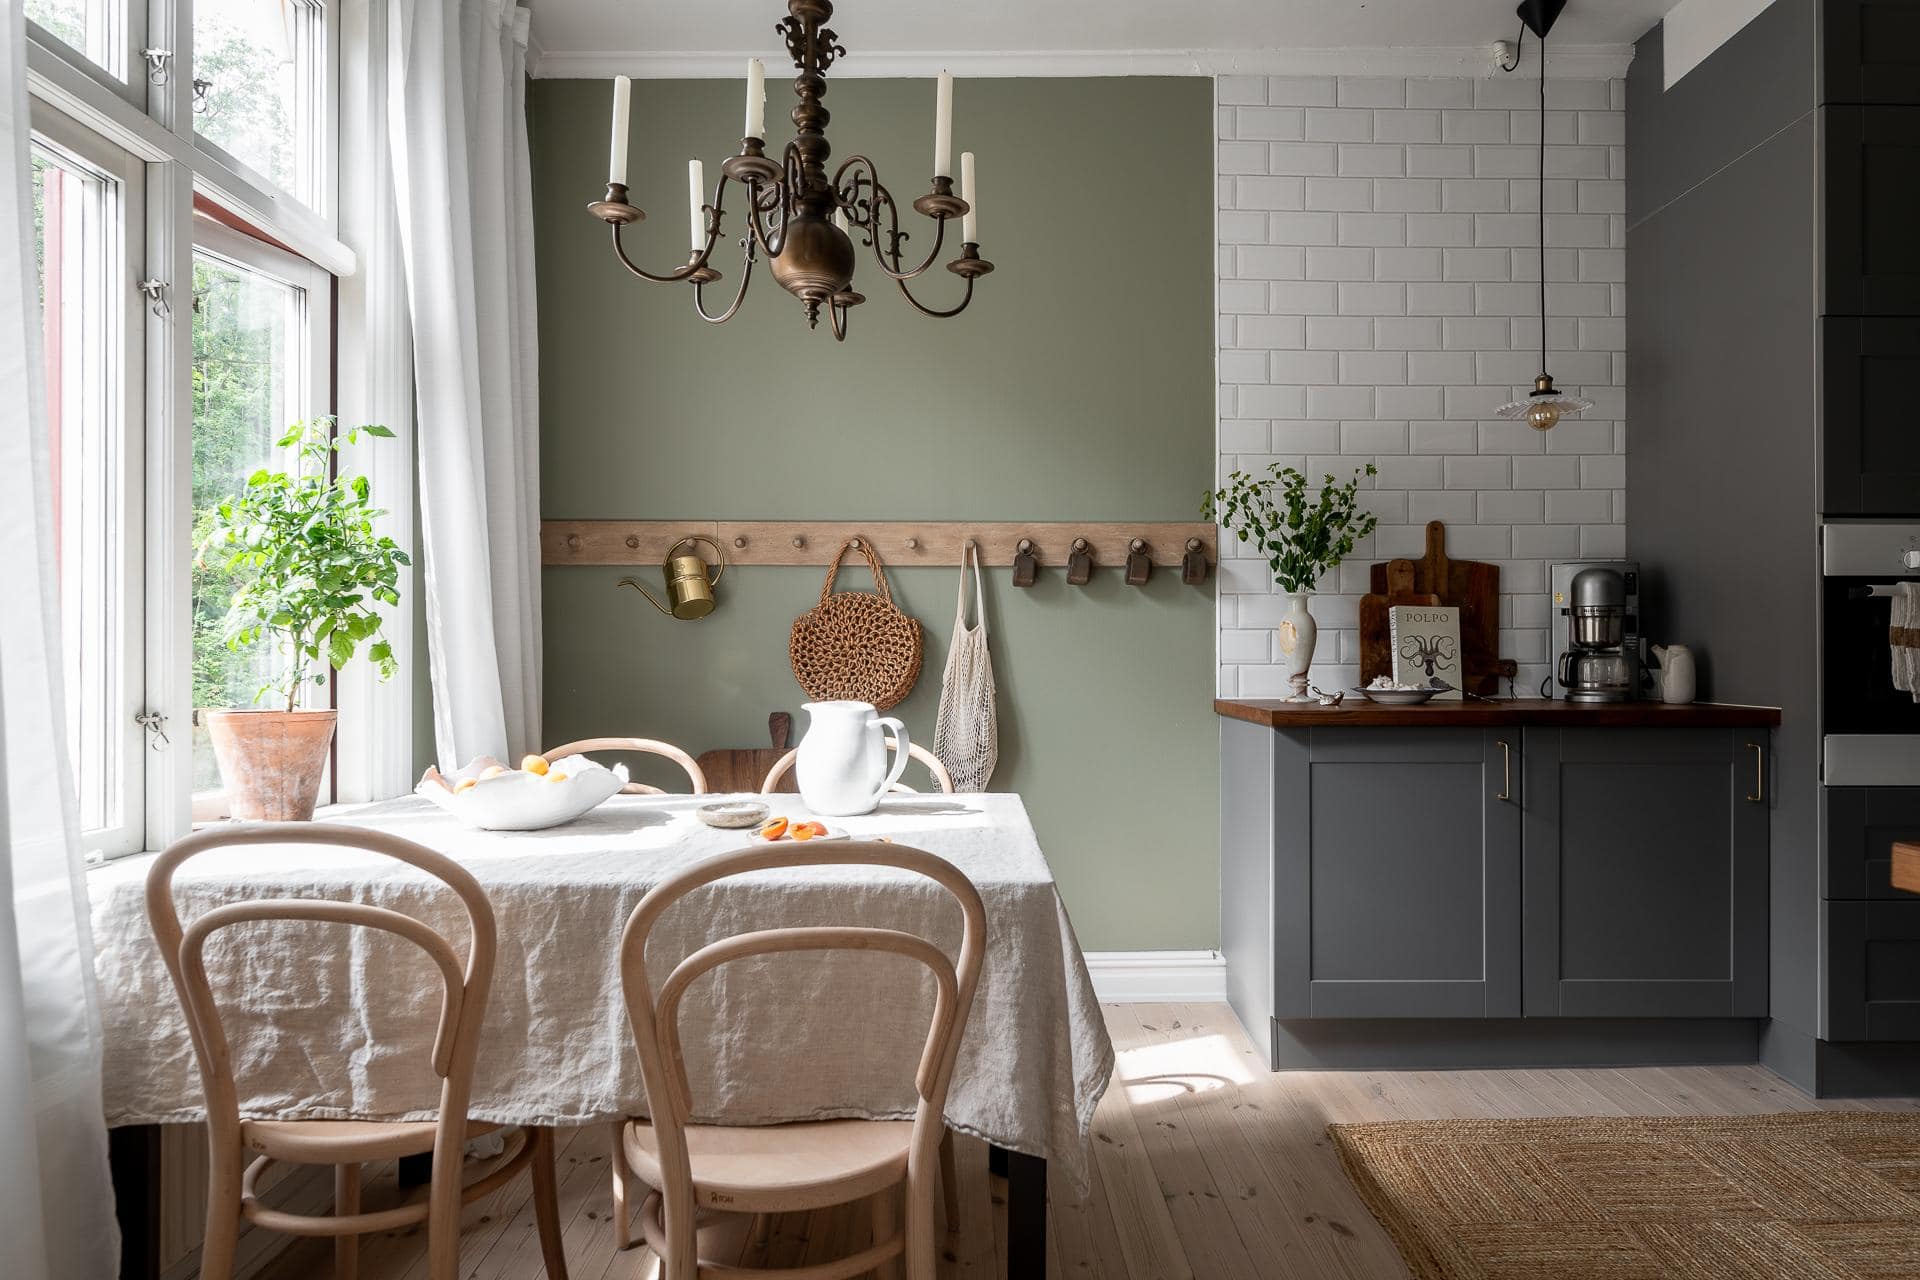 https://cocolapinedesign.com/wp-content/uploads/Grey-kitchen-cabinets-against-sage-green-walls-in-an-attic-apartment5.jpg